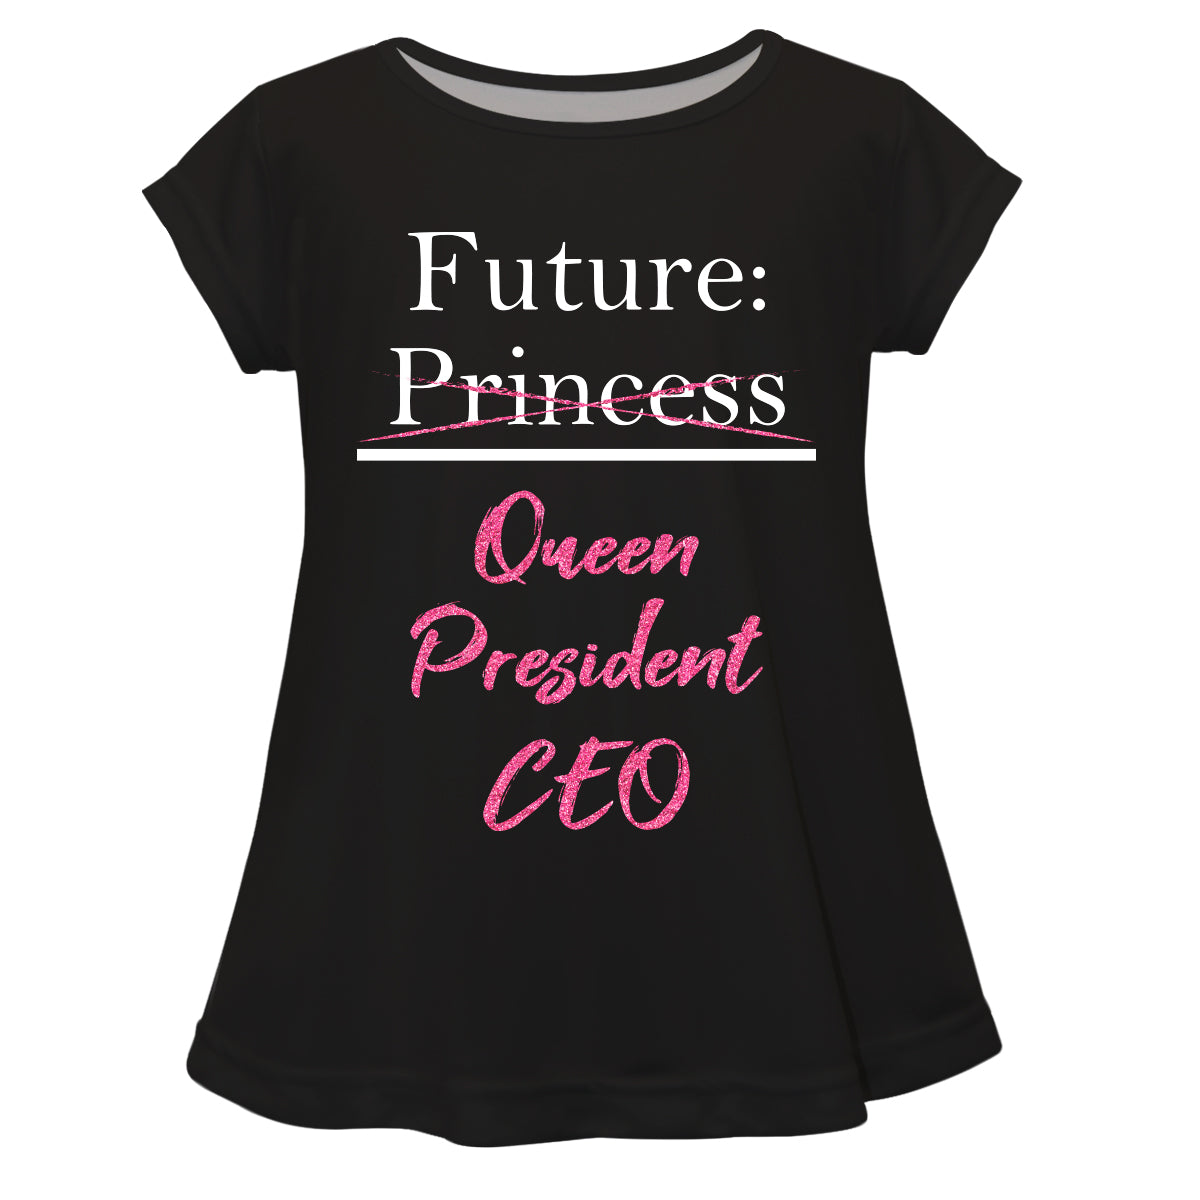 Future Queen President CEO Black Short Sleeve Laurie Top - Wimziy&Co.